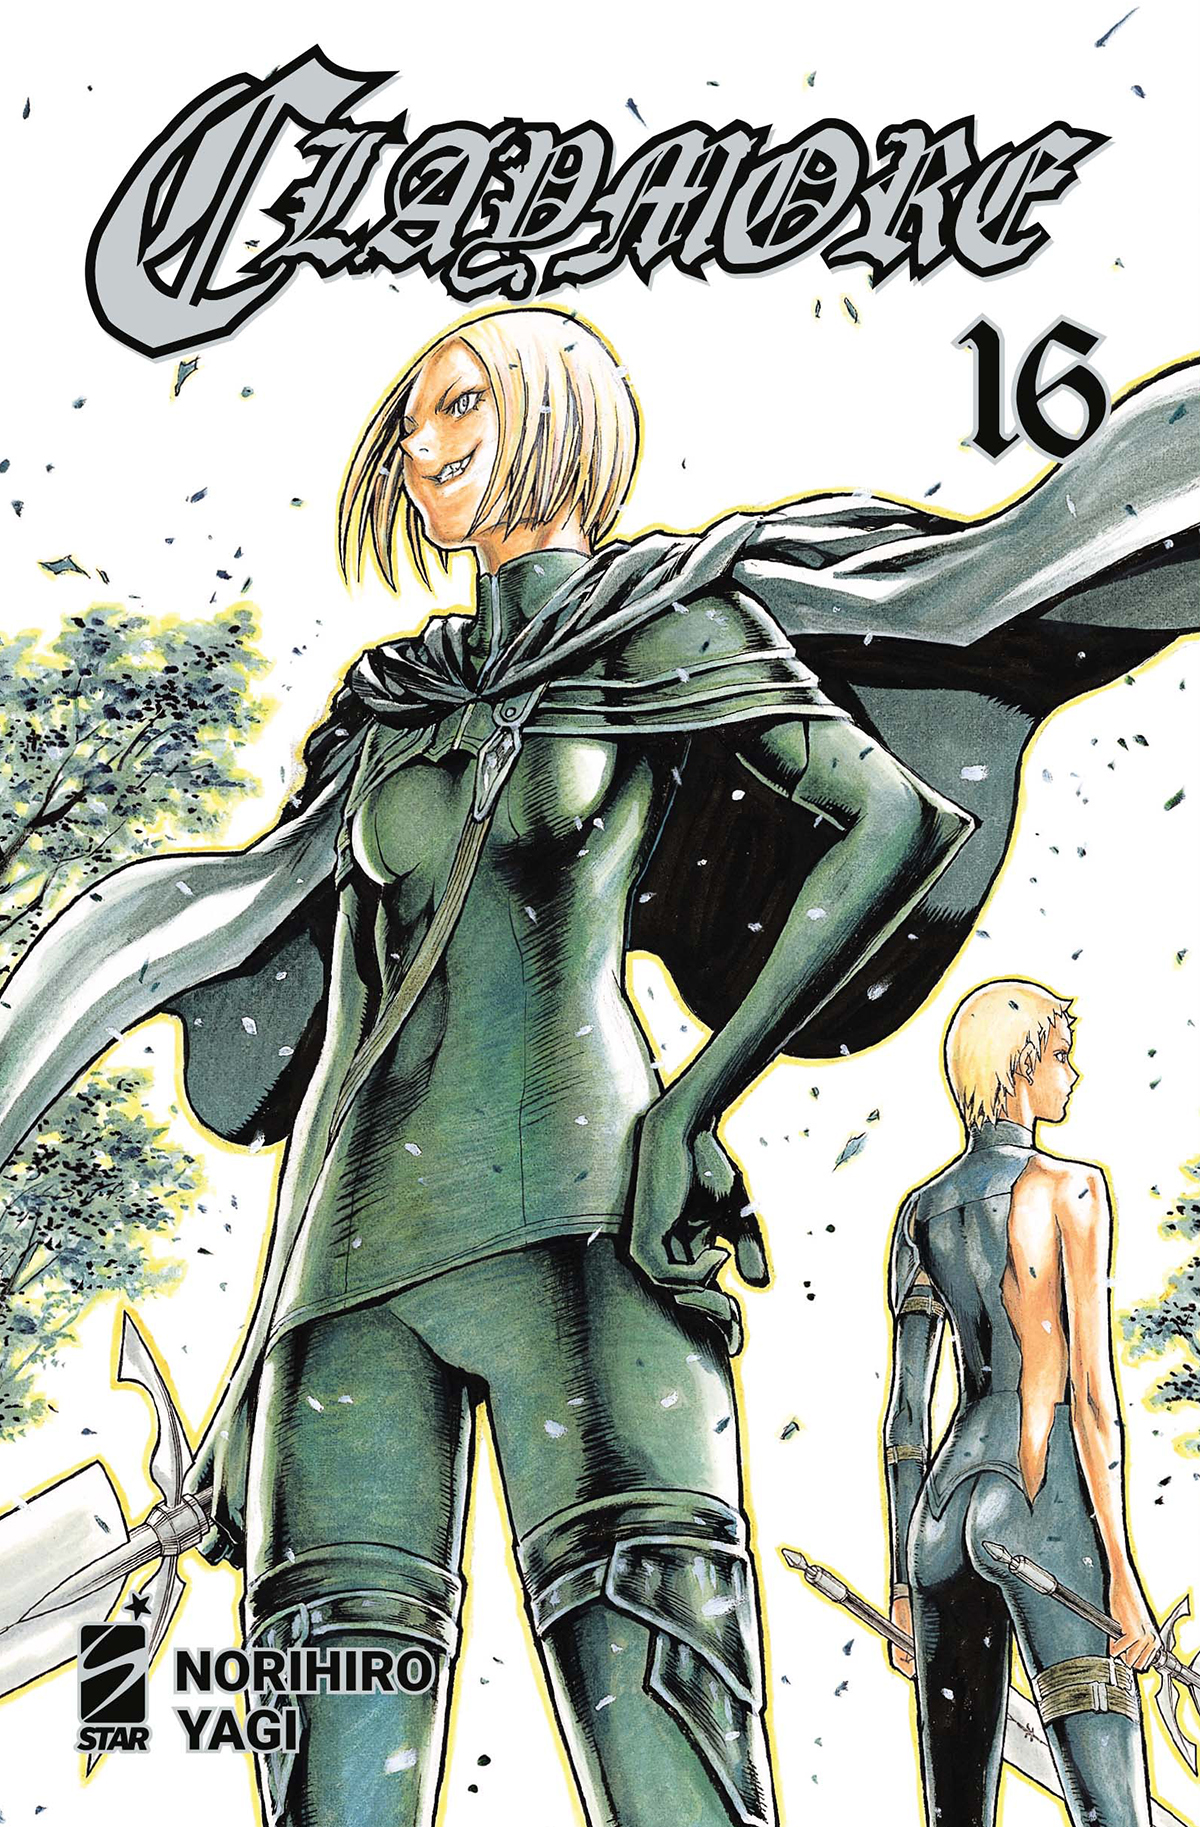 CLAYMORE NEW EDITION #016